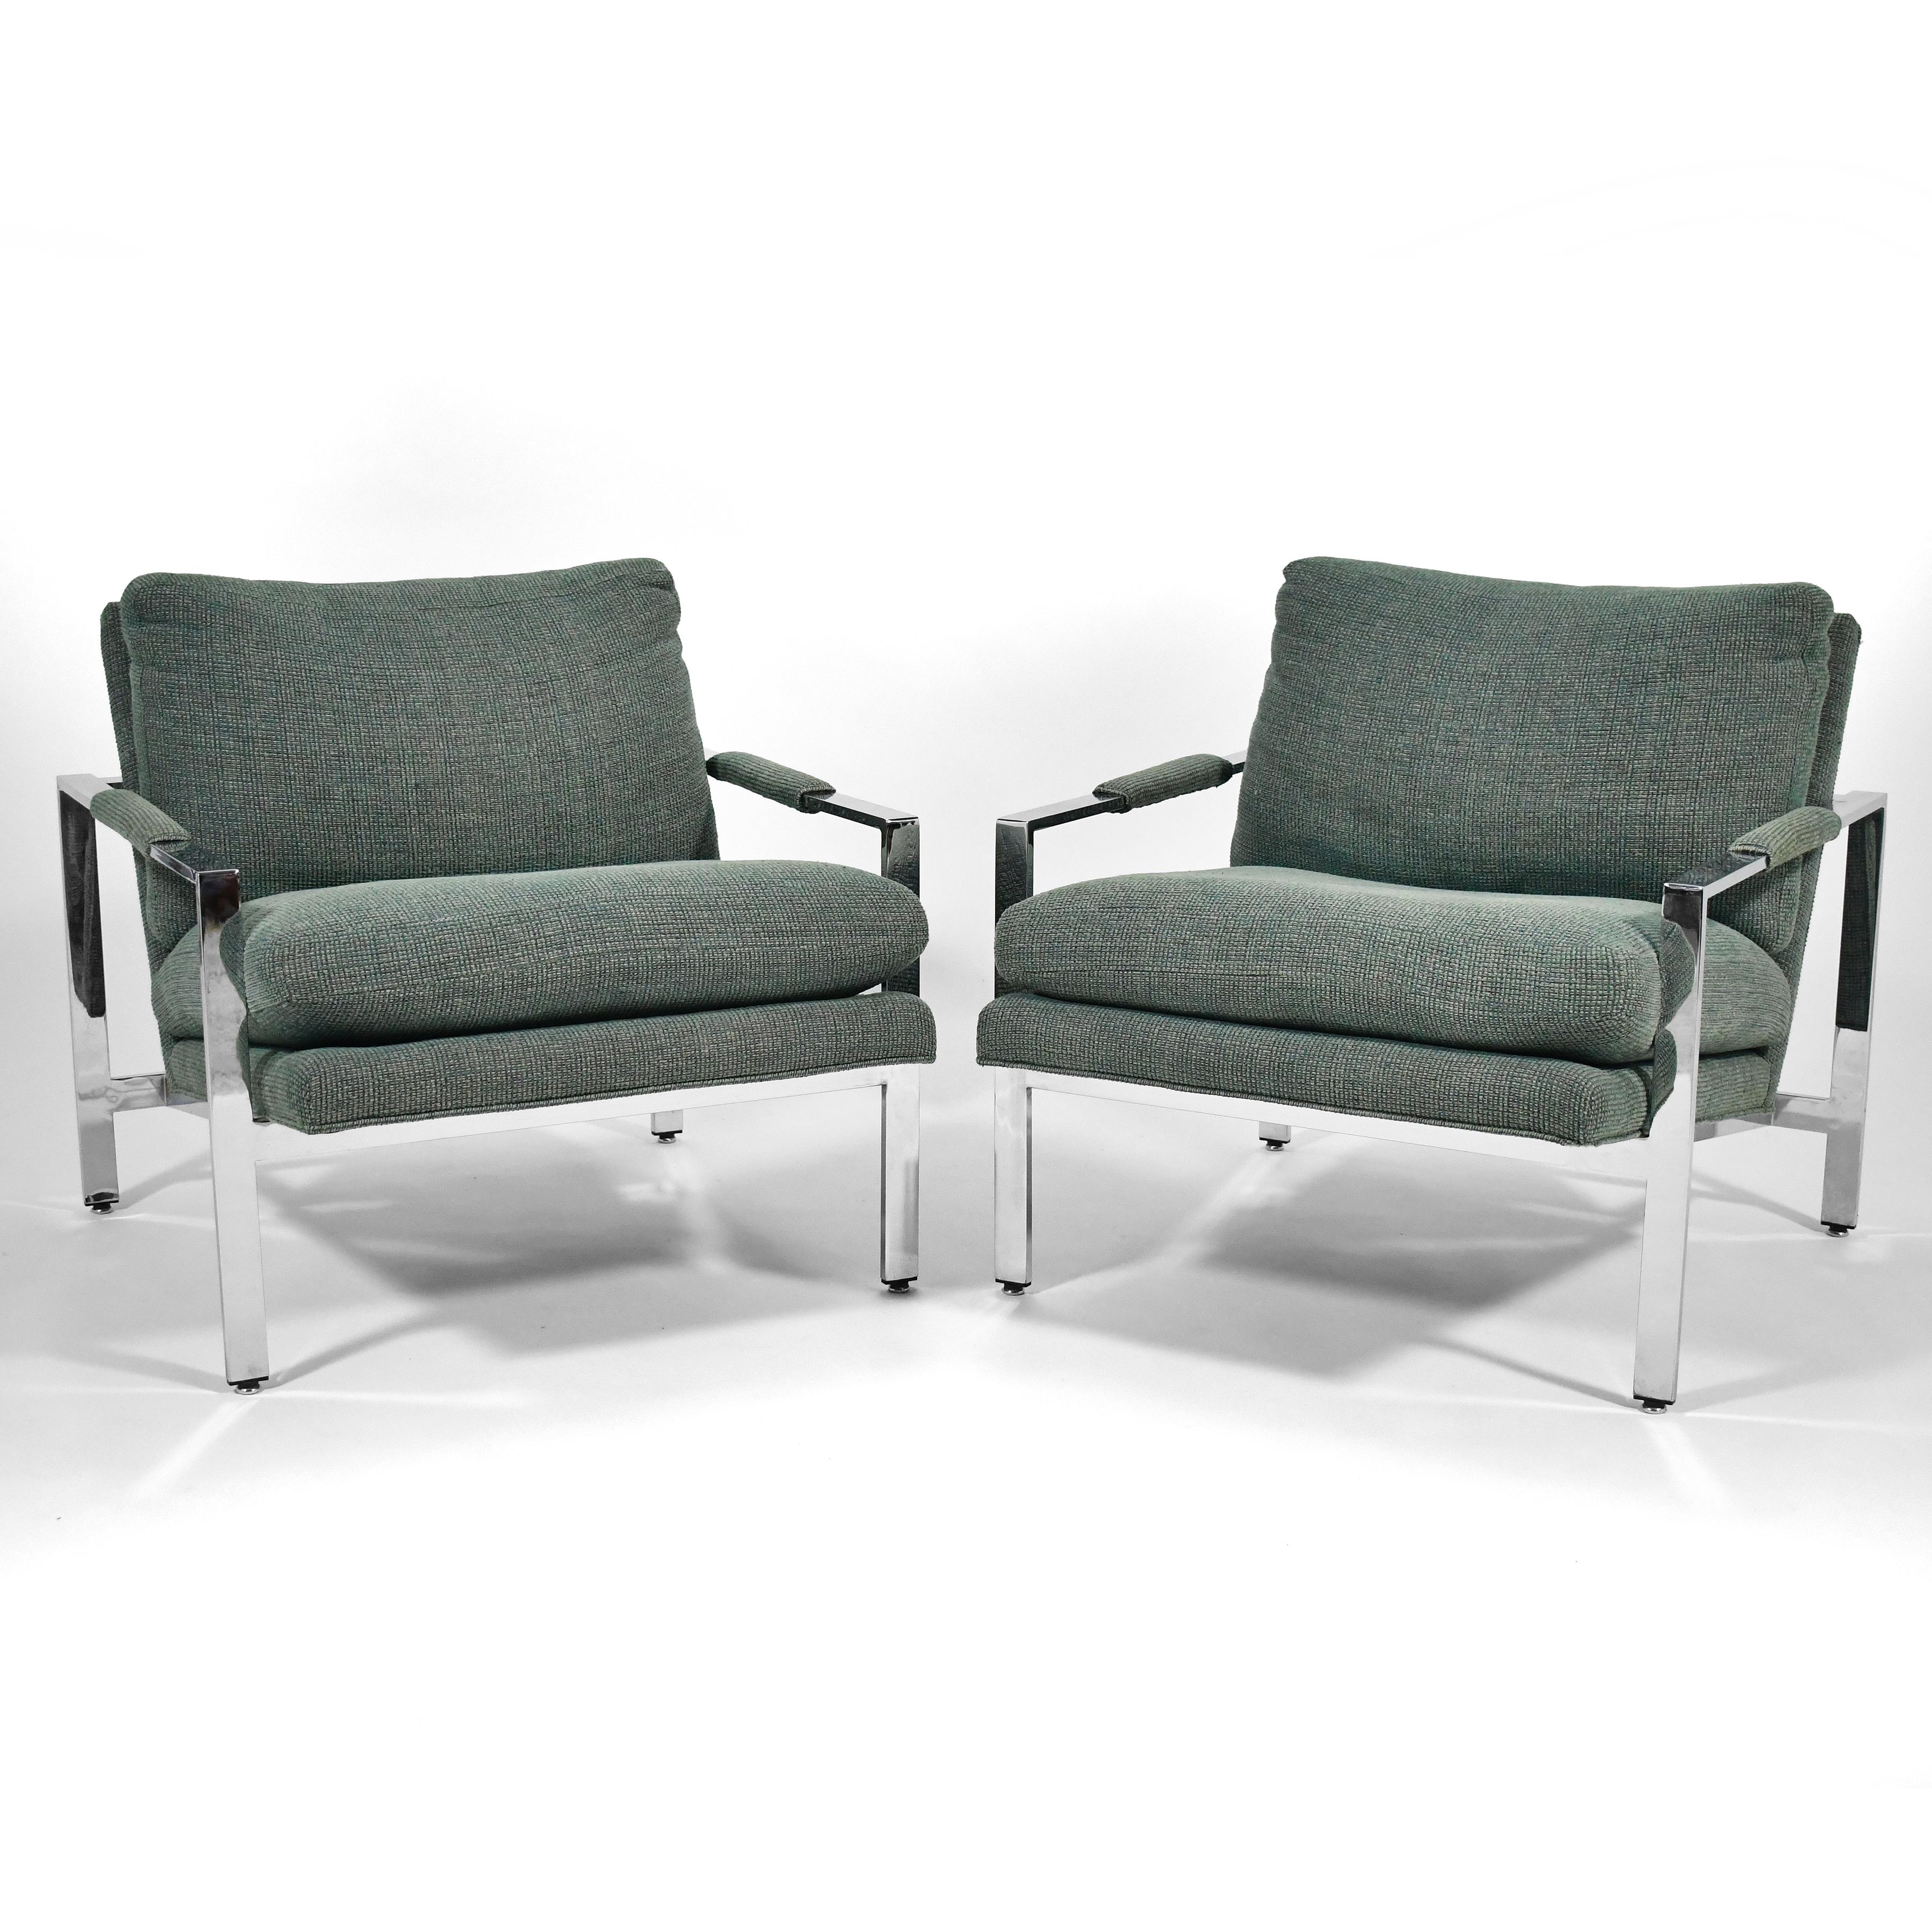 American Milo Baughman Pair of Lounge Chairs by Thayer Coggin